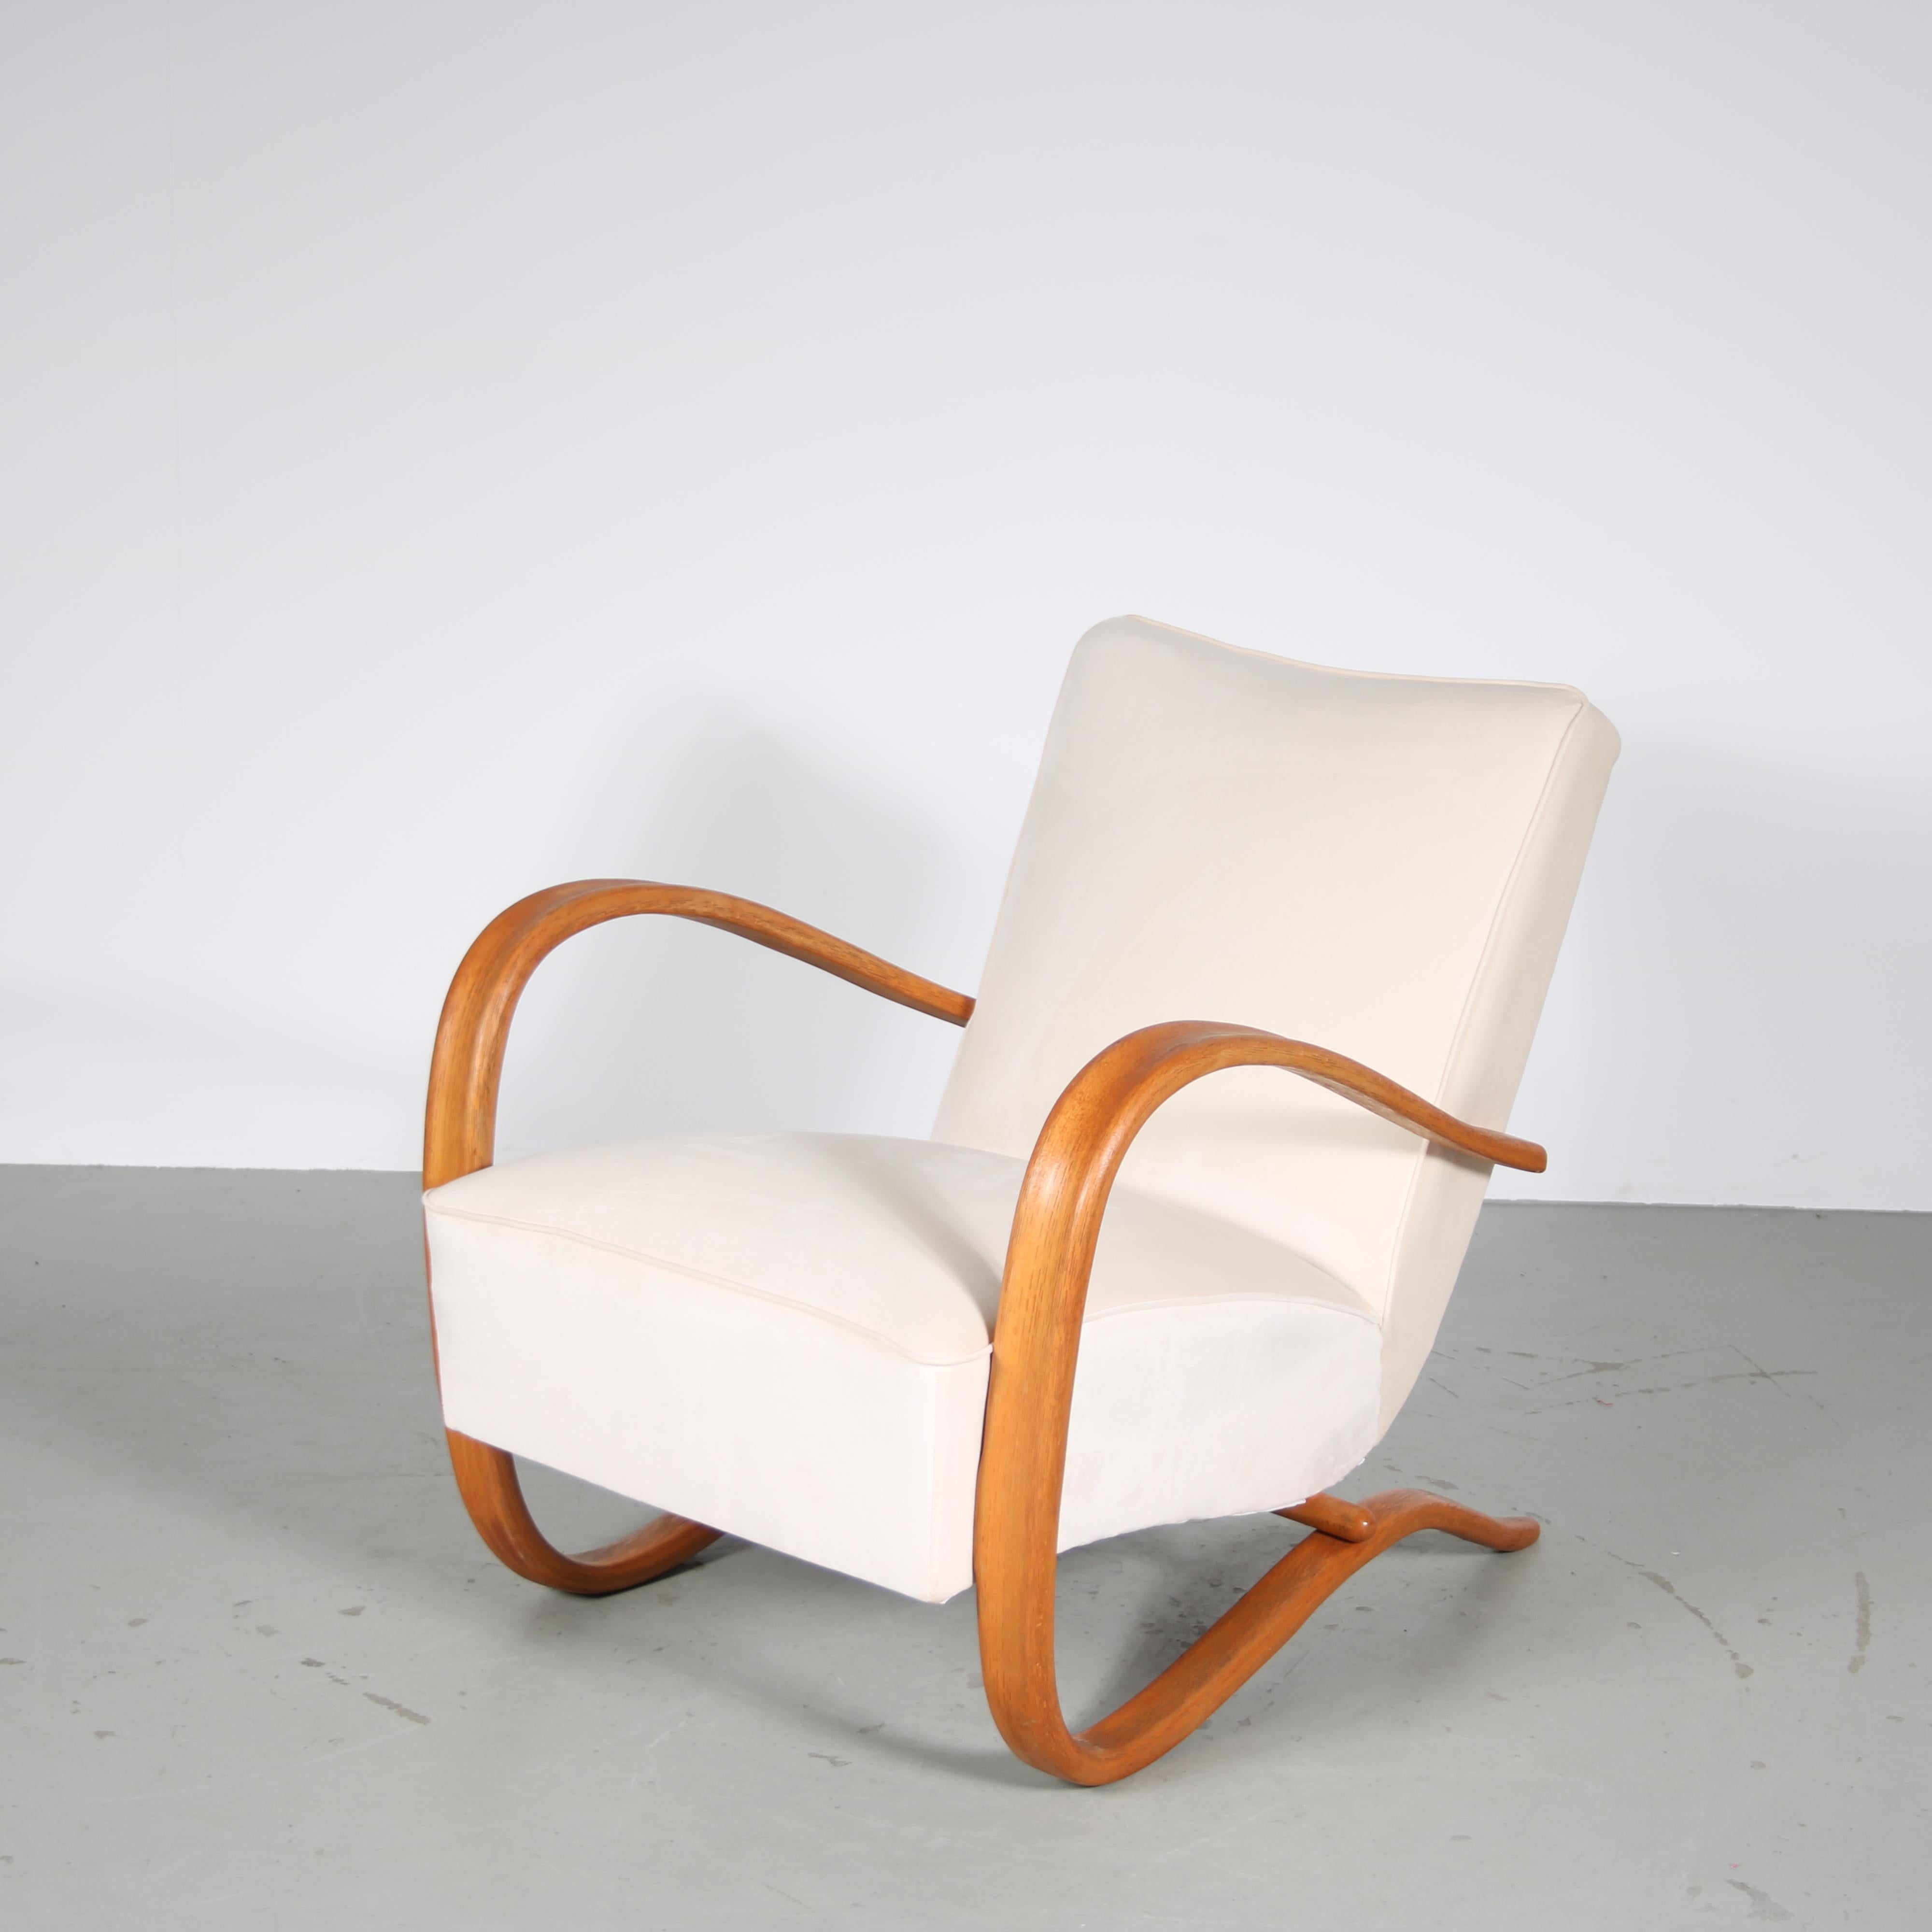 Pair of Jindrich Halabala Chairs for Up Zadovy, Czech 1950 For Sale 2